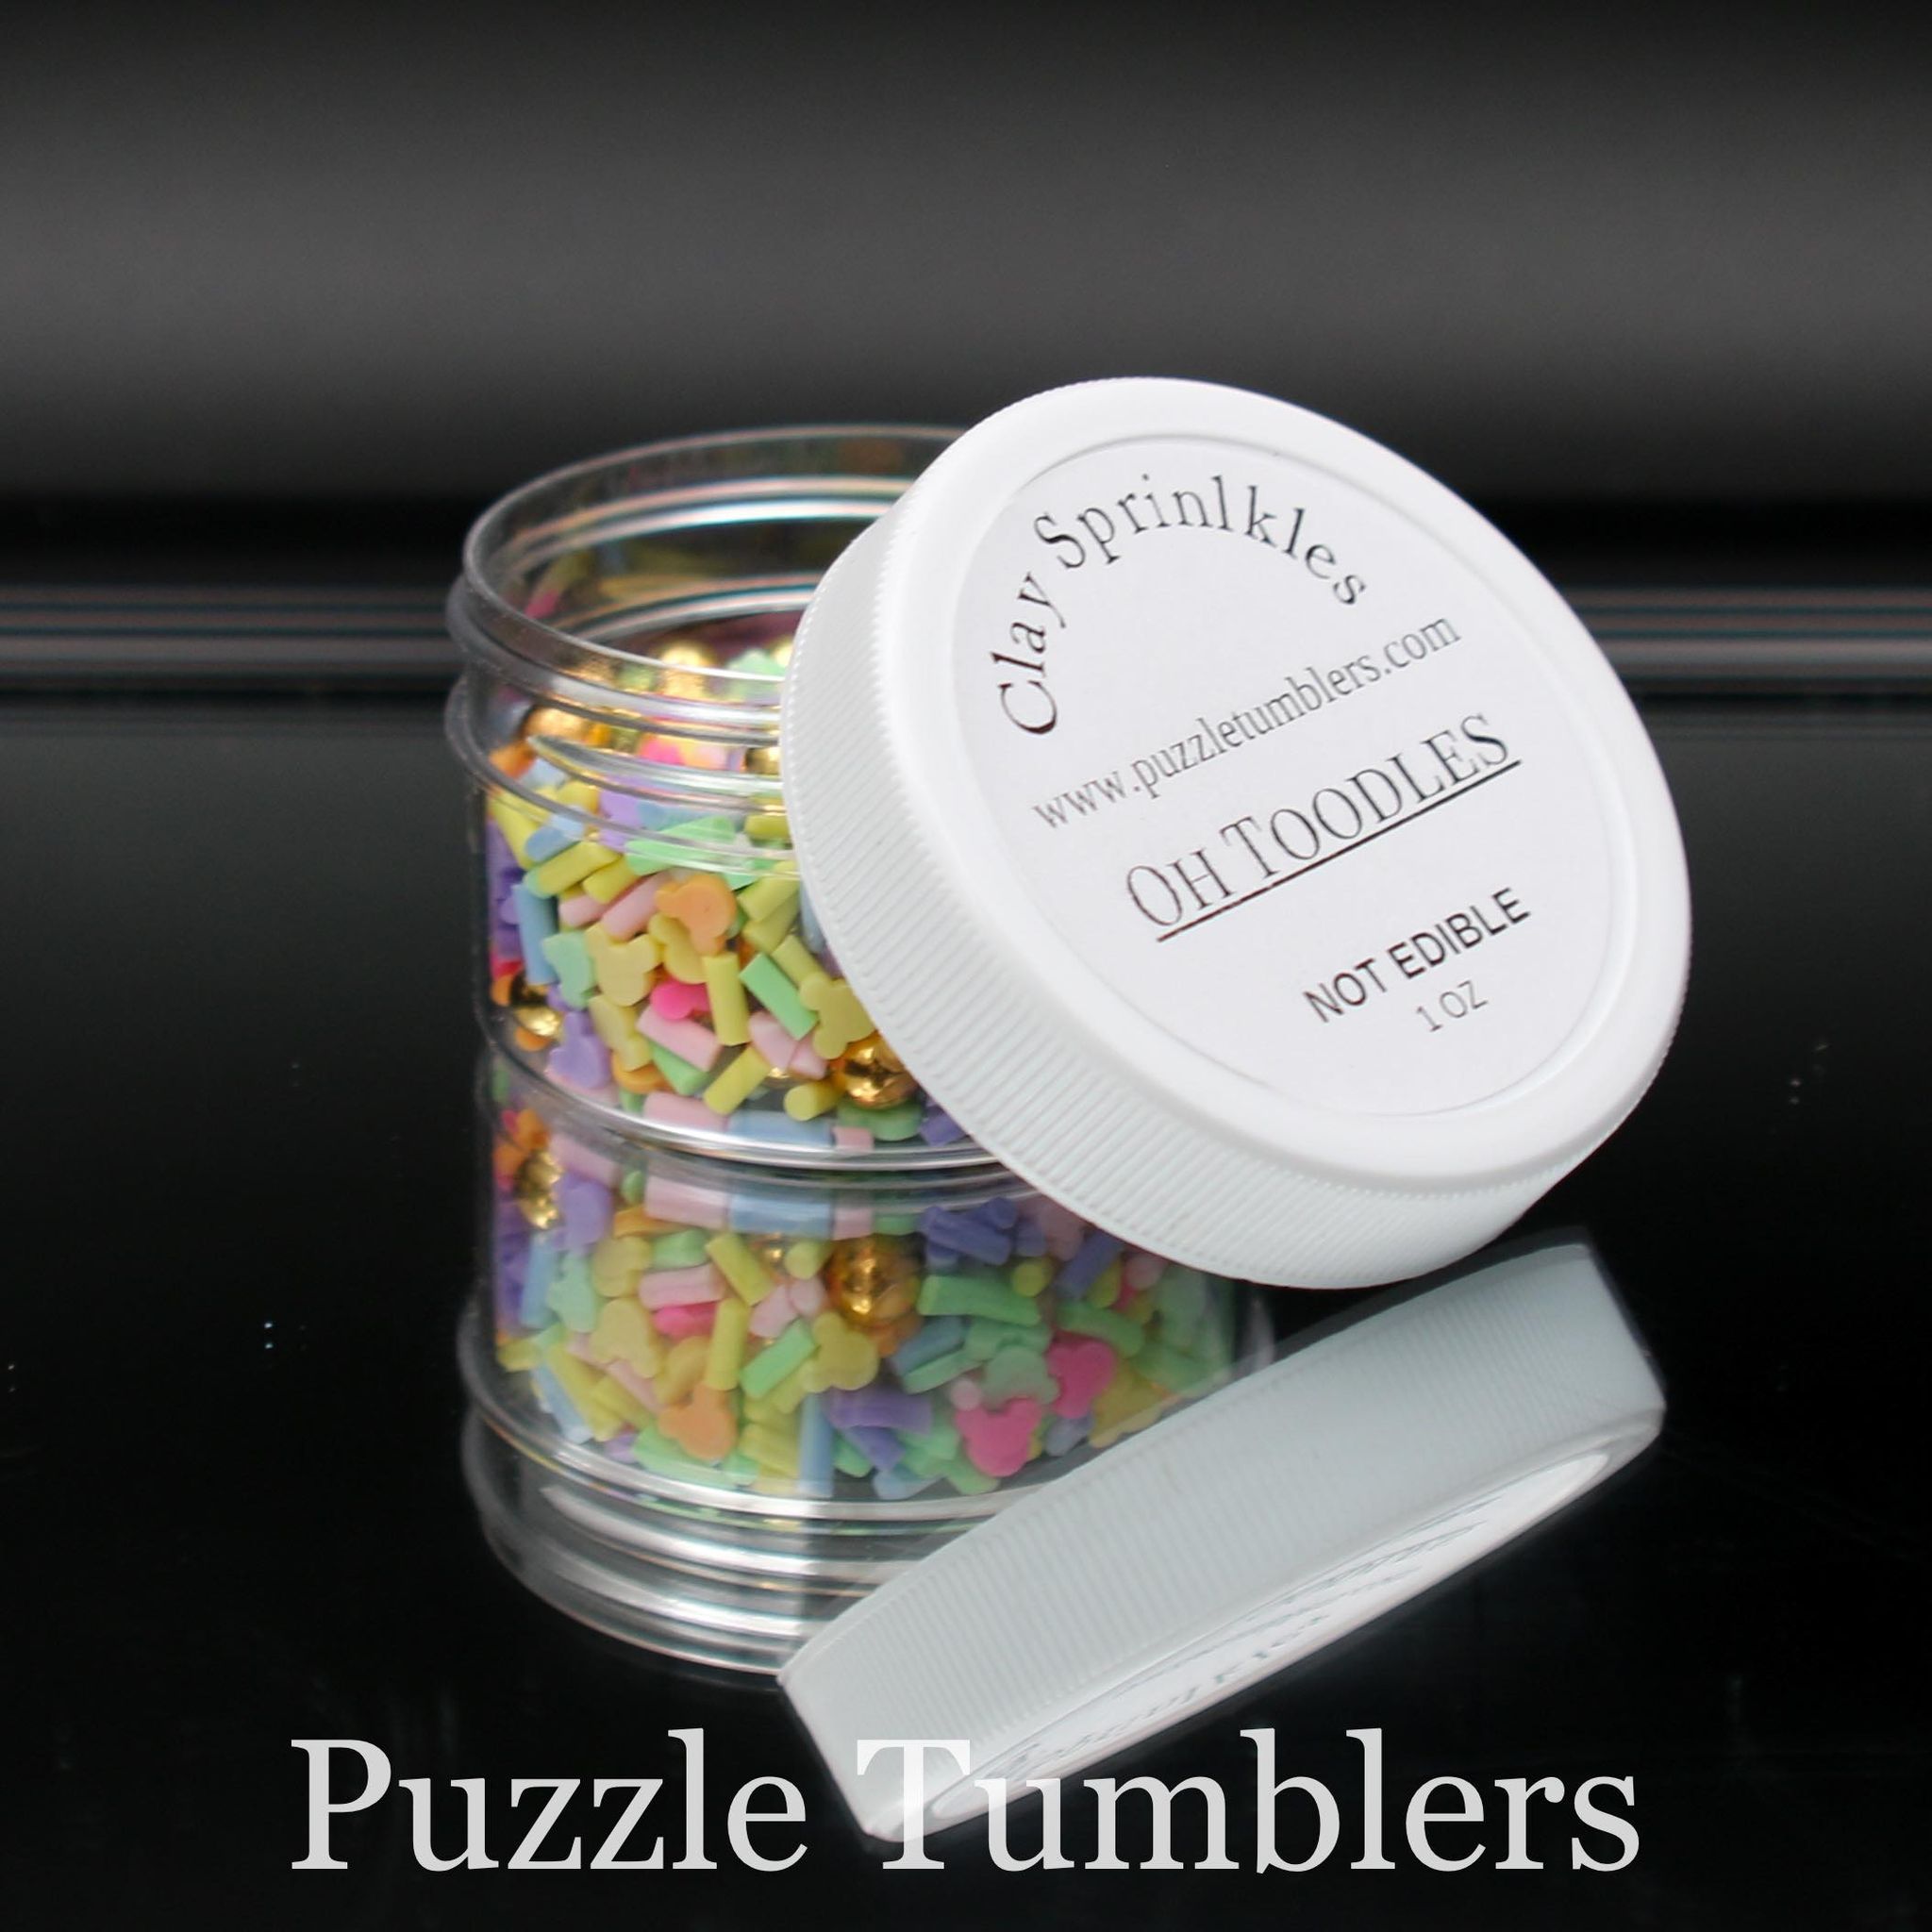 OH TOODLES - POLYMER CLAY SPRINKLES – Puzzle Tumblers